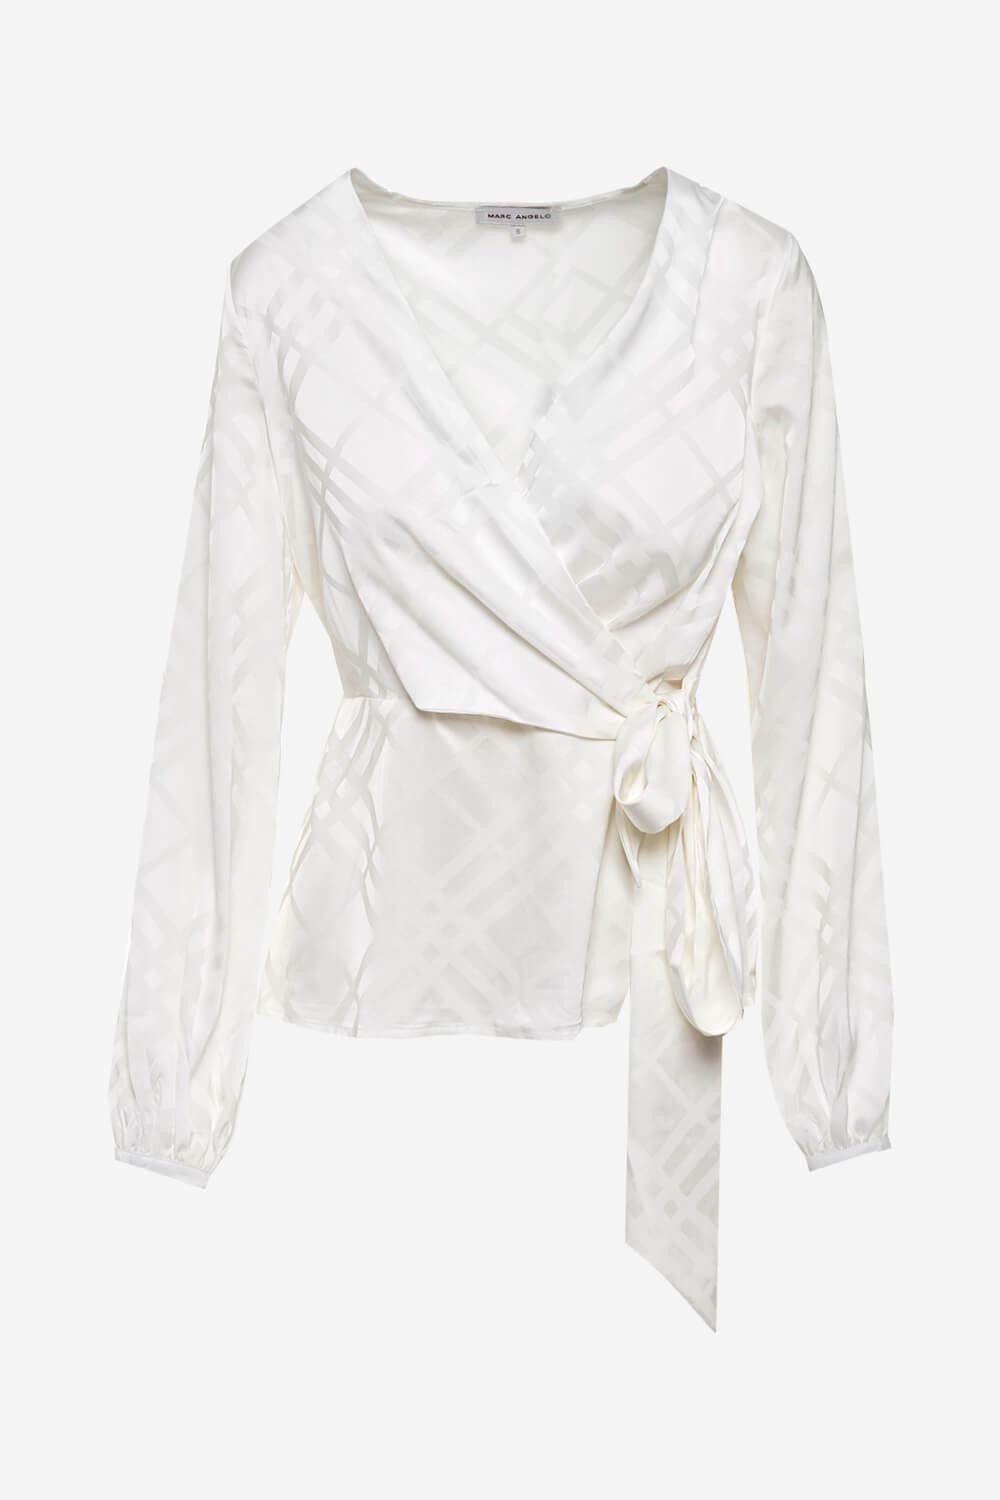 Marc Angelo Long Sleeve Wrap Front Blouse in Off White | iCLOTHING